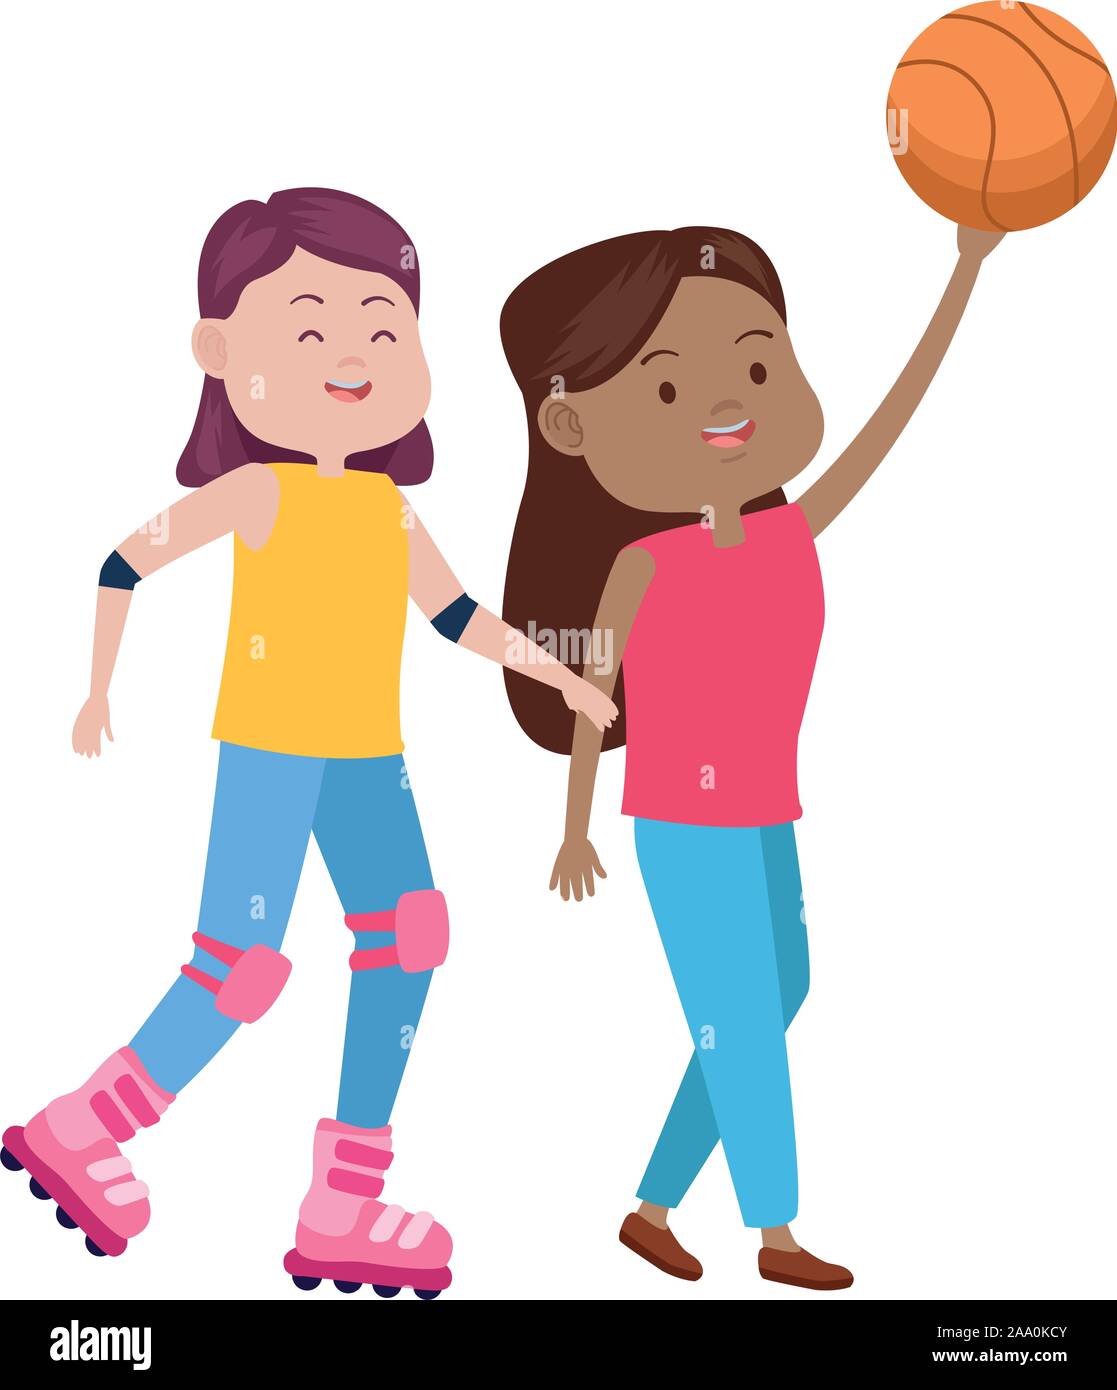 young women playing basketball characters icon Stock Vector